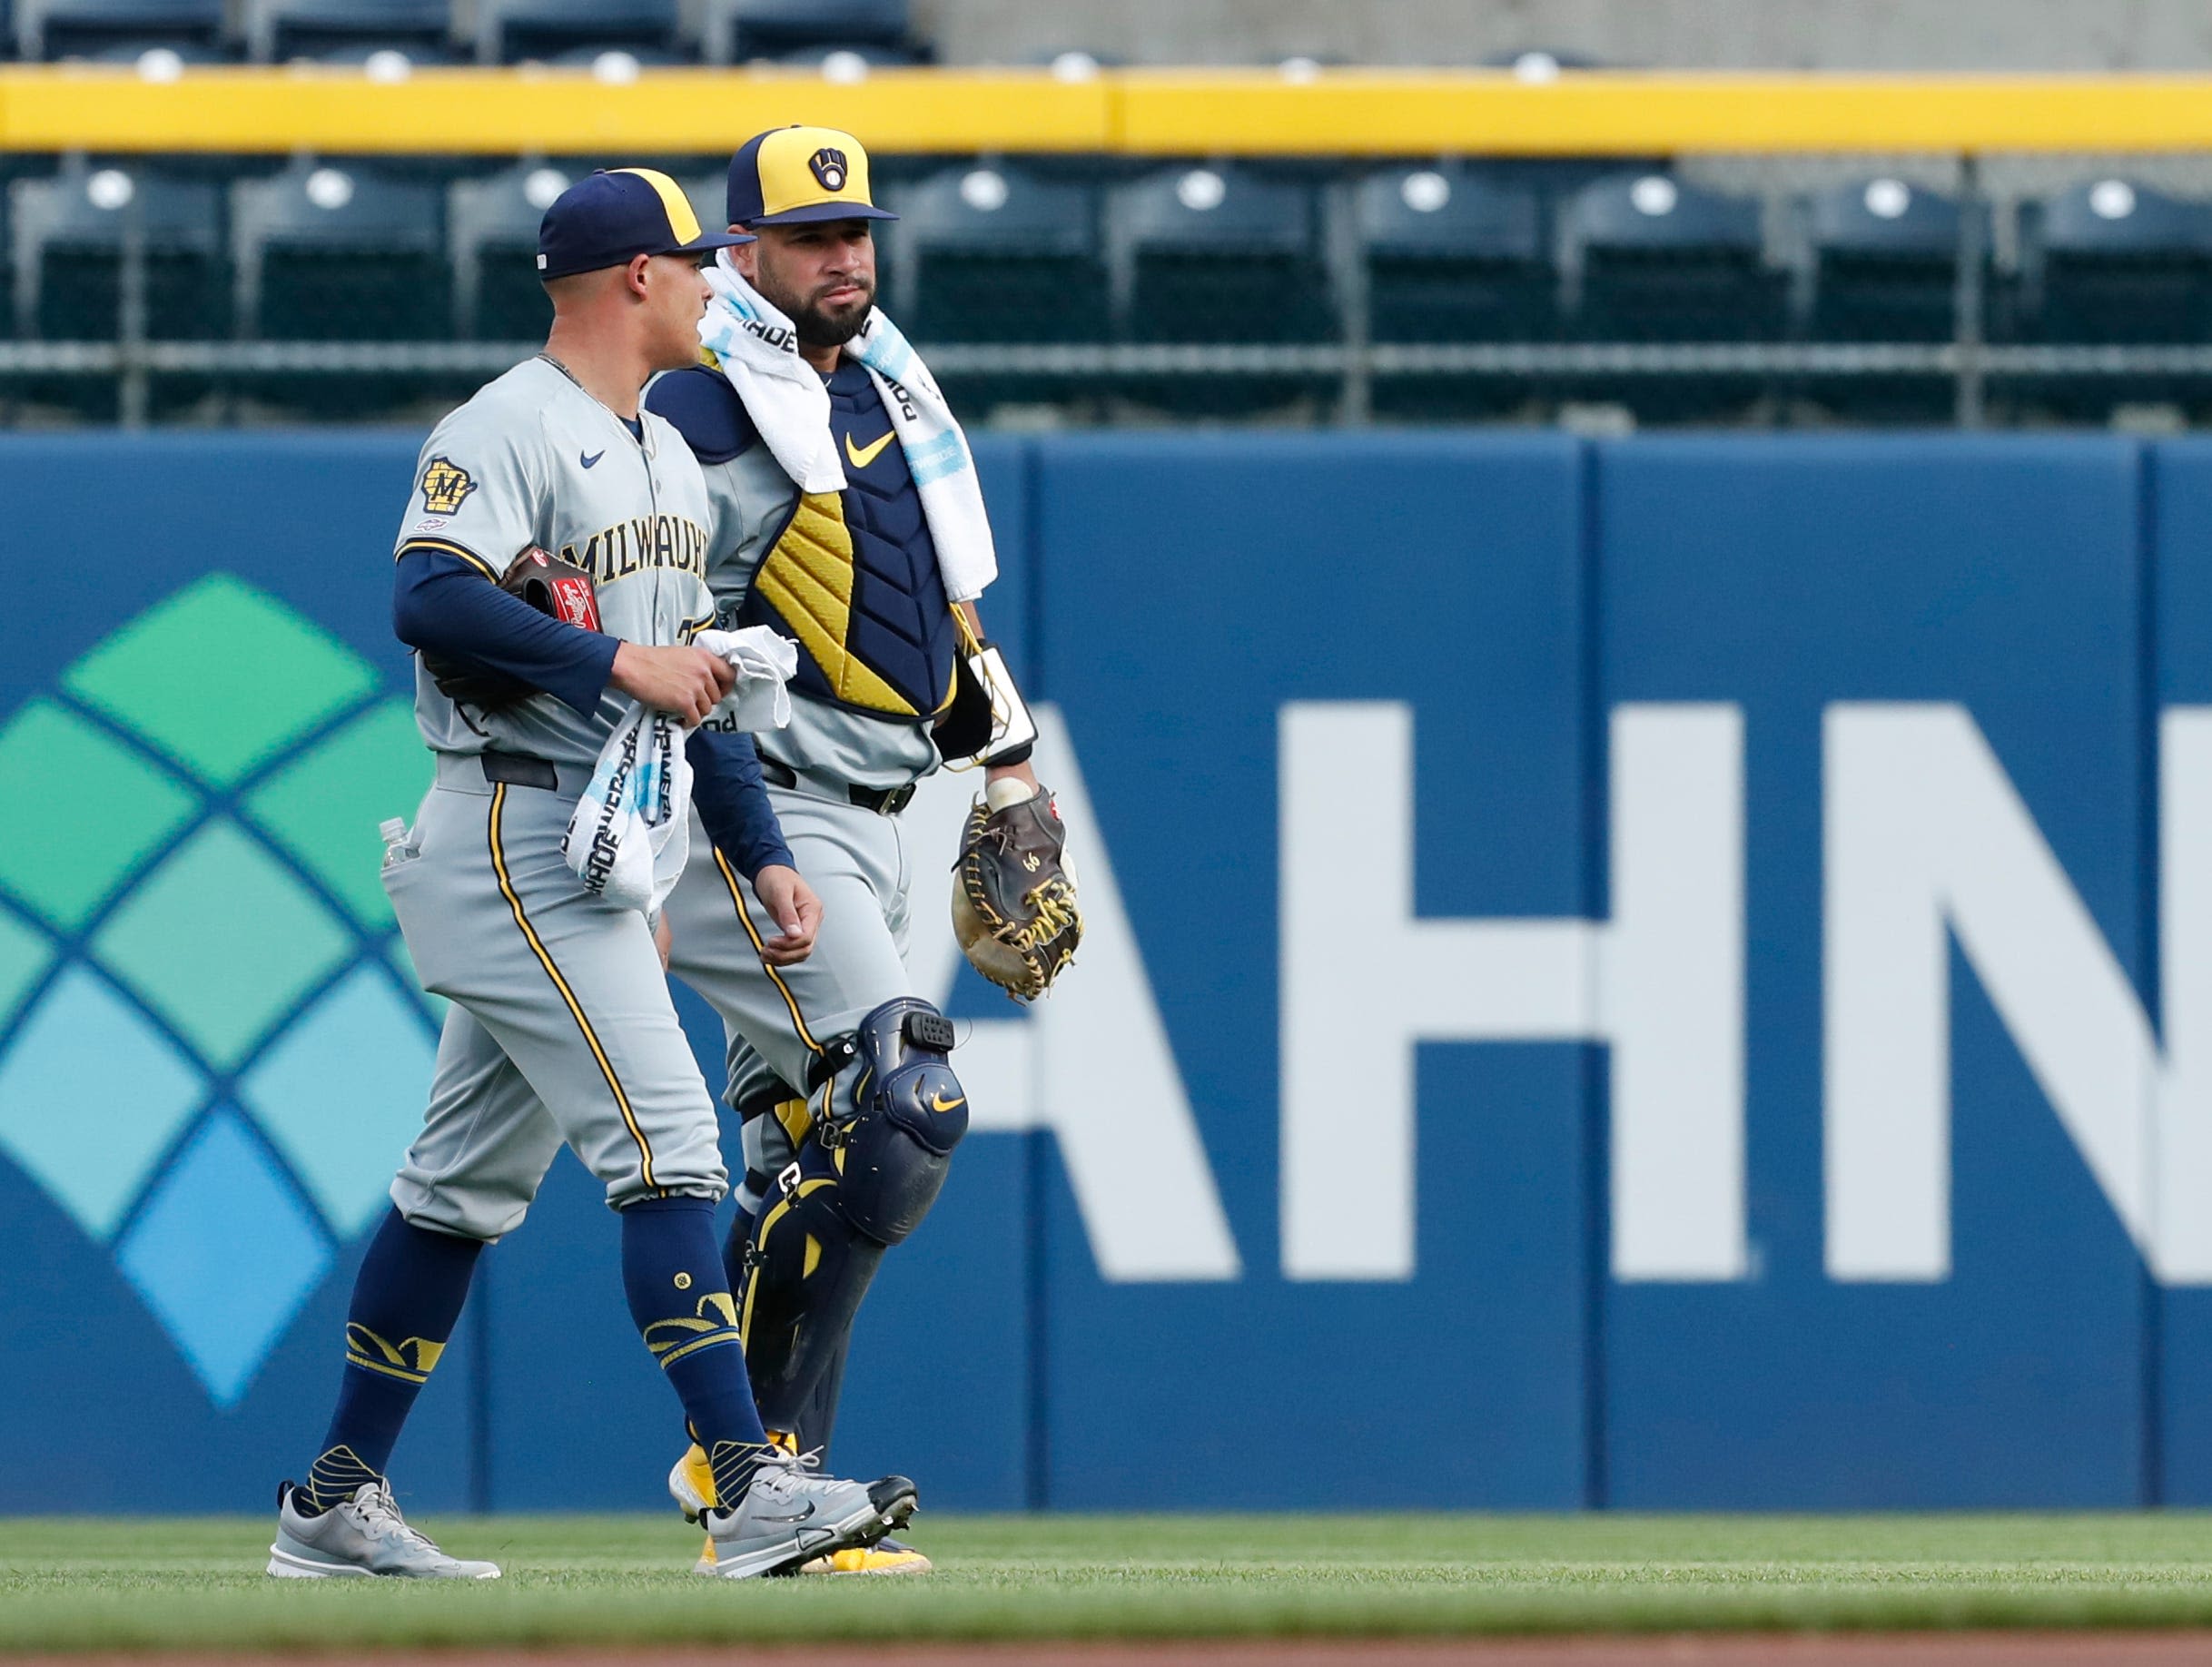 Milwaukee Brewers vs Chicago Cubs: live score, game highlights, starting lineups